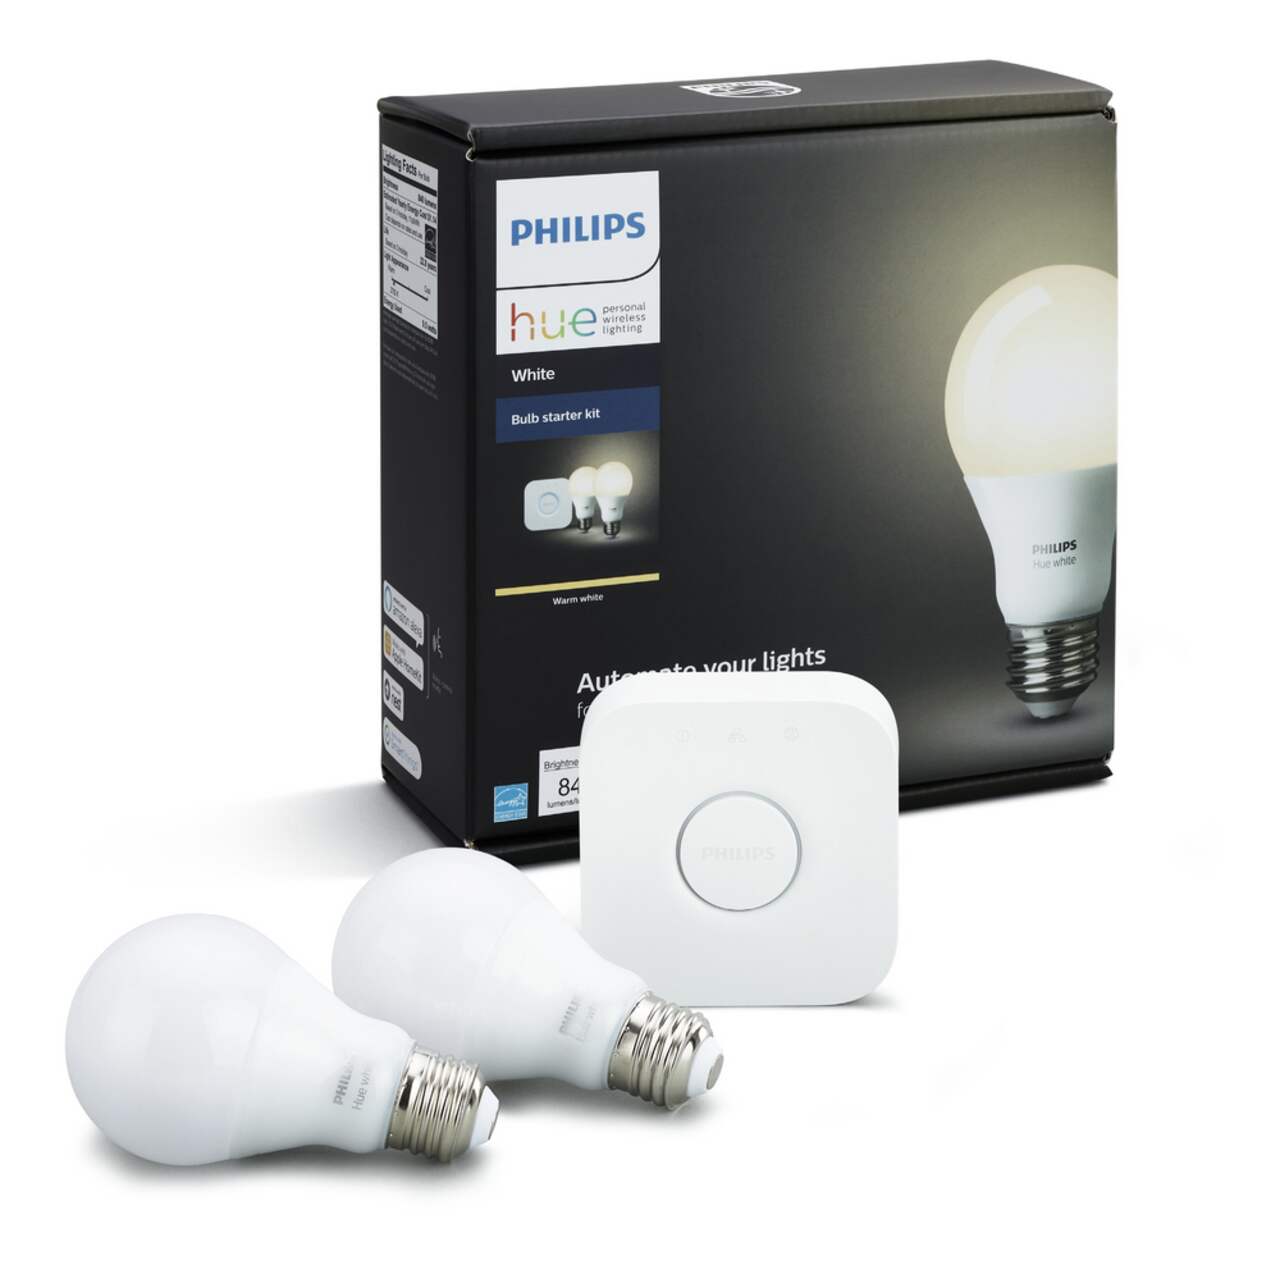 Philips smart LED bulb driving me nuts : r/homeautomation